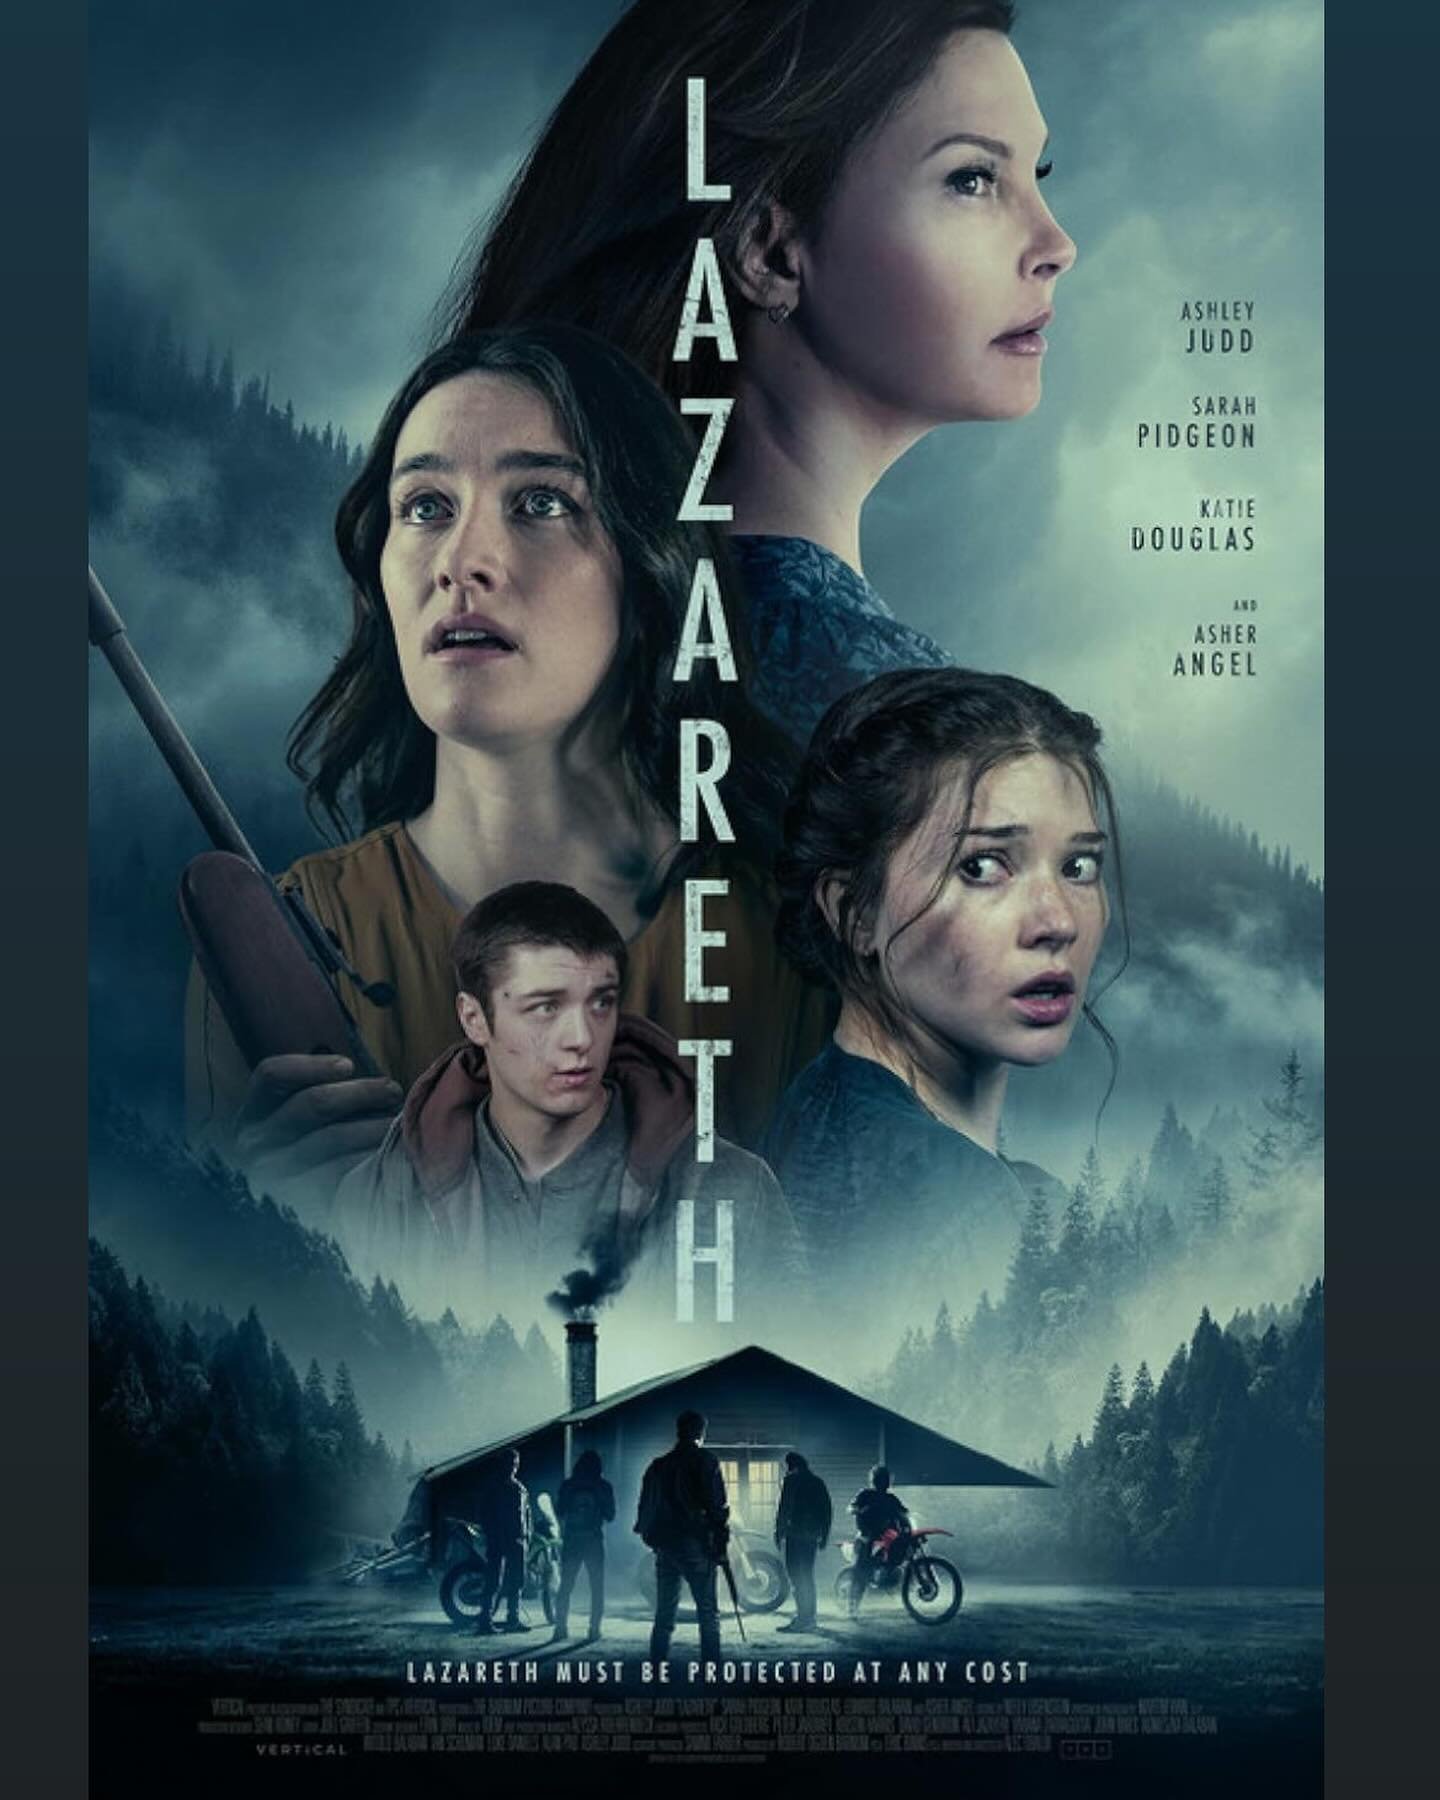 Lazareth movie is here!  What joy to be a part of something so darn warm. Our screening just felt&hellip;good. Fun memories, fast friendships, laughter to tears and pants wetting, and  a sense of pride. I am appreciating a moment that is both filling